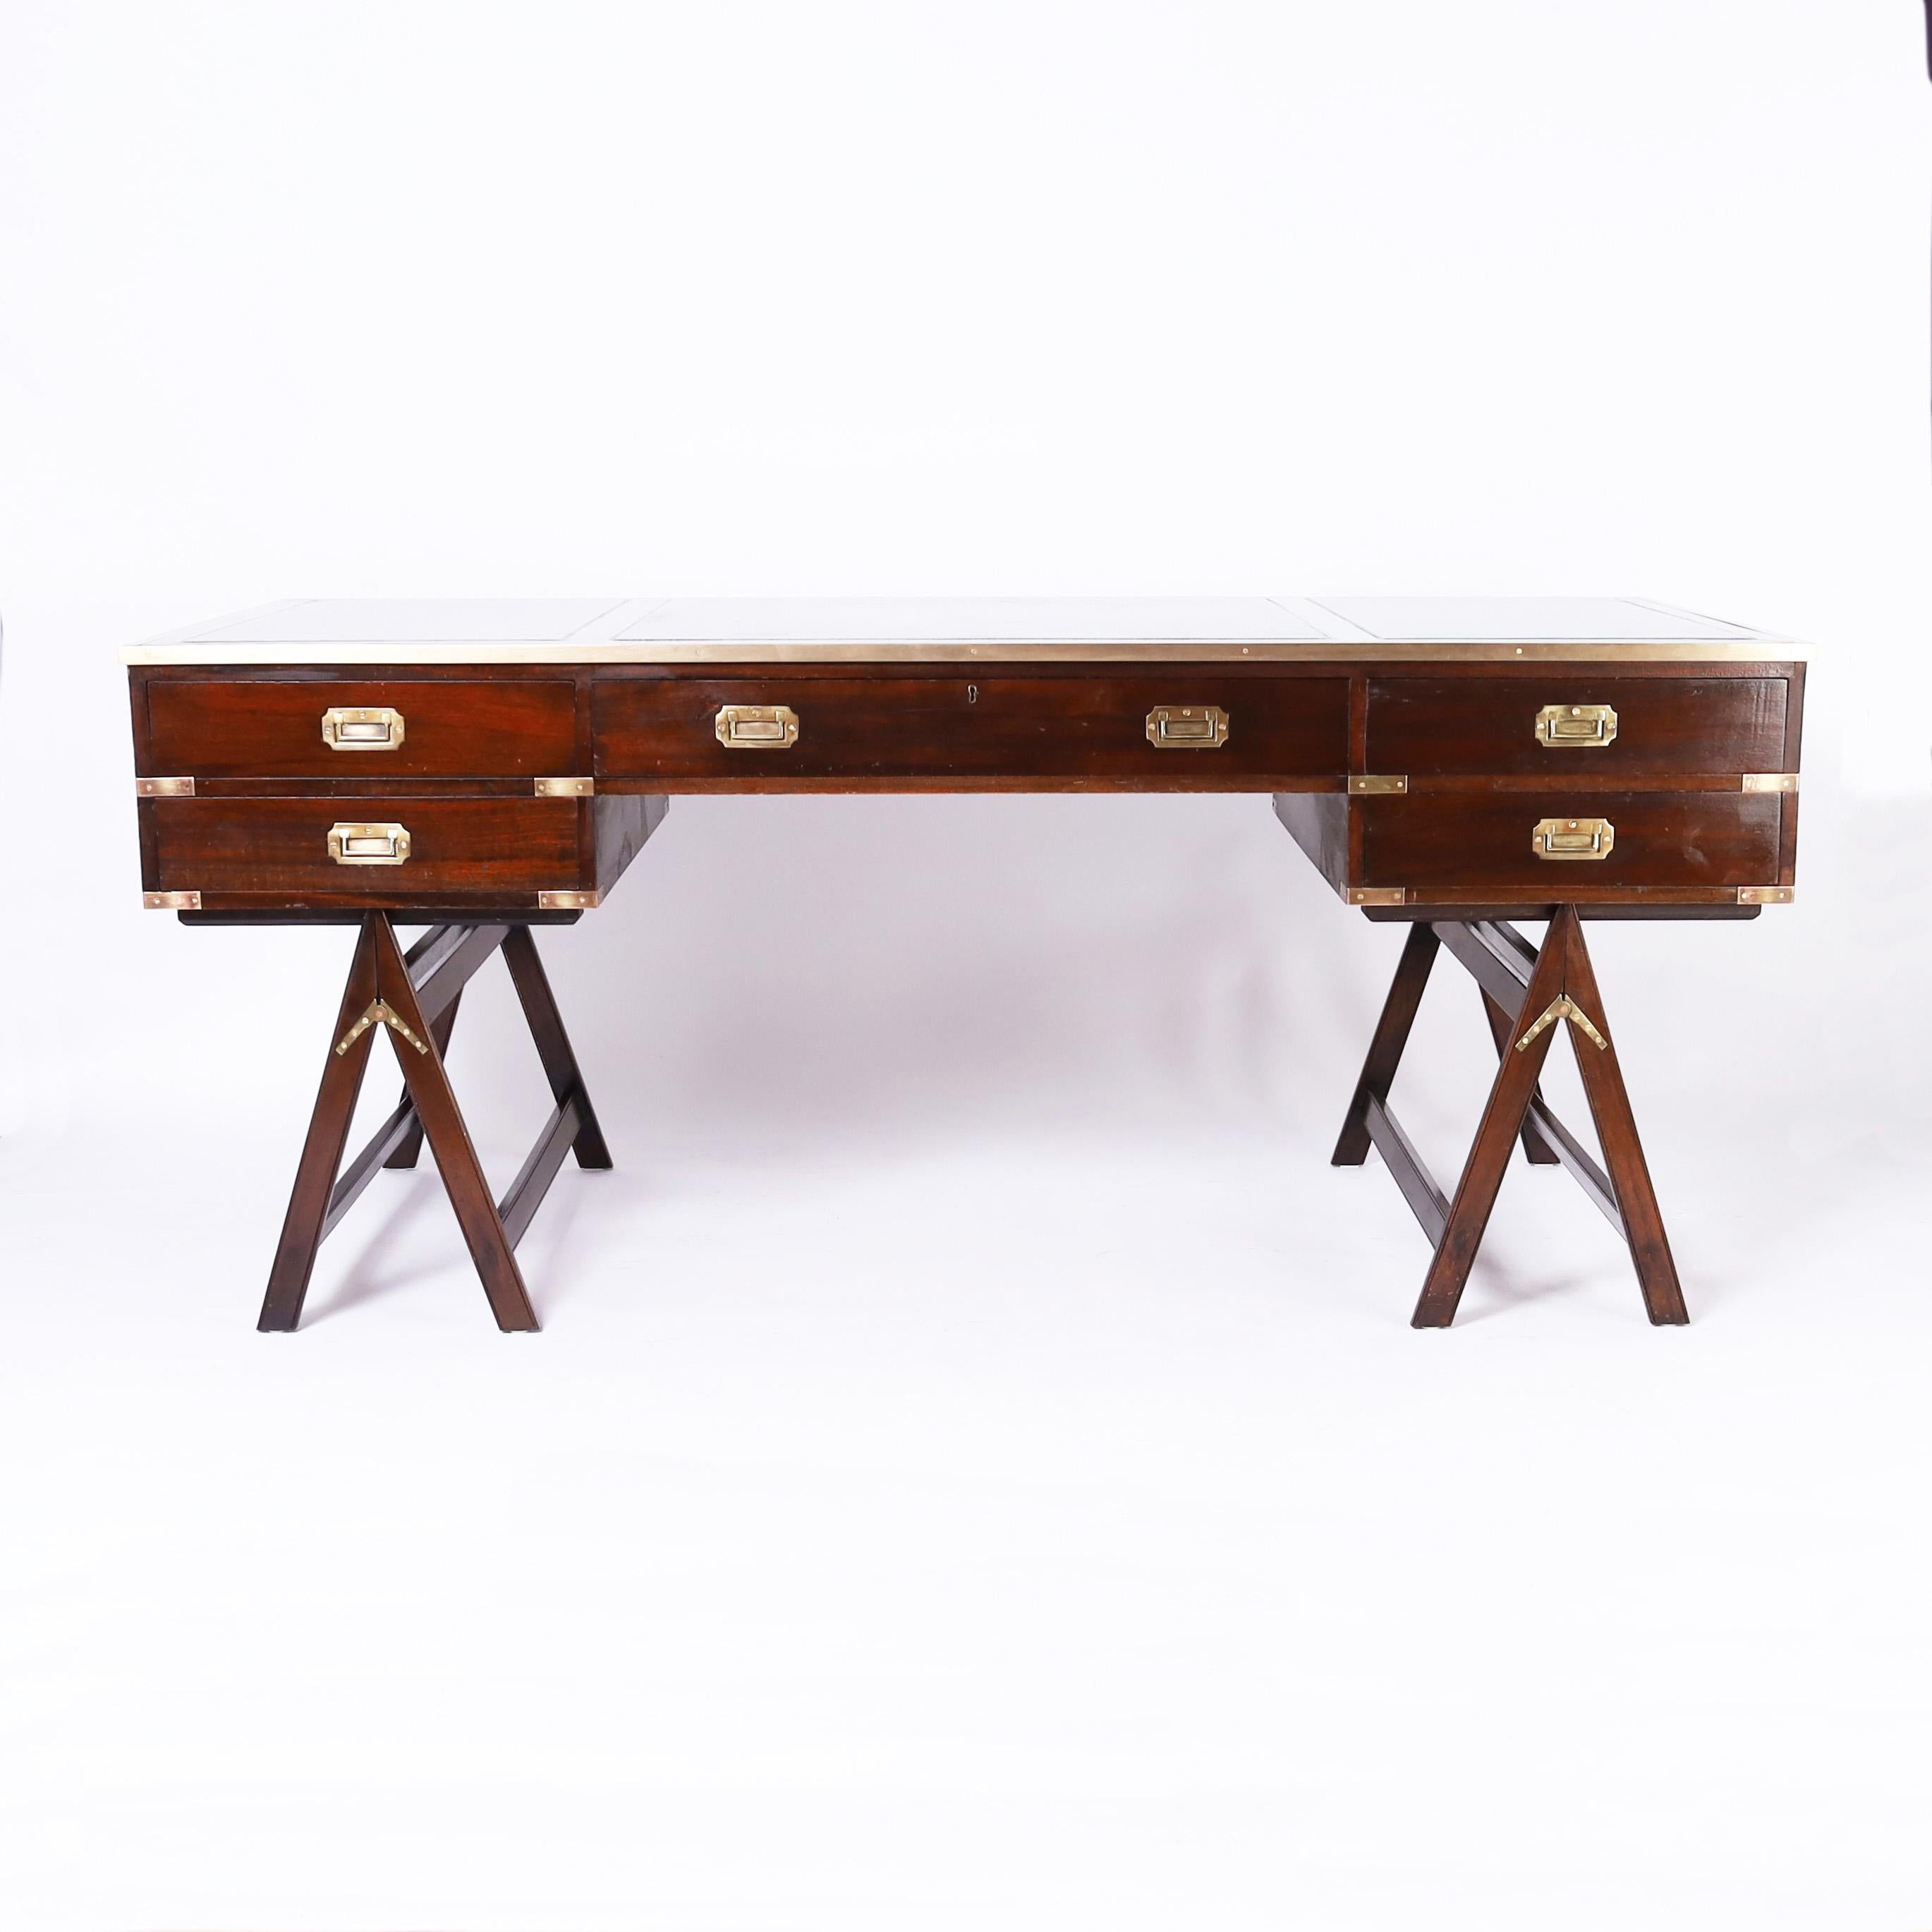 Handsome vintage British Colonial campaign desk with a tooled leather top bound in brass on a five drawer case with brass campaign hardware on two folding sawhorse bases.

Kneehole: 23.5